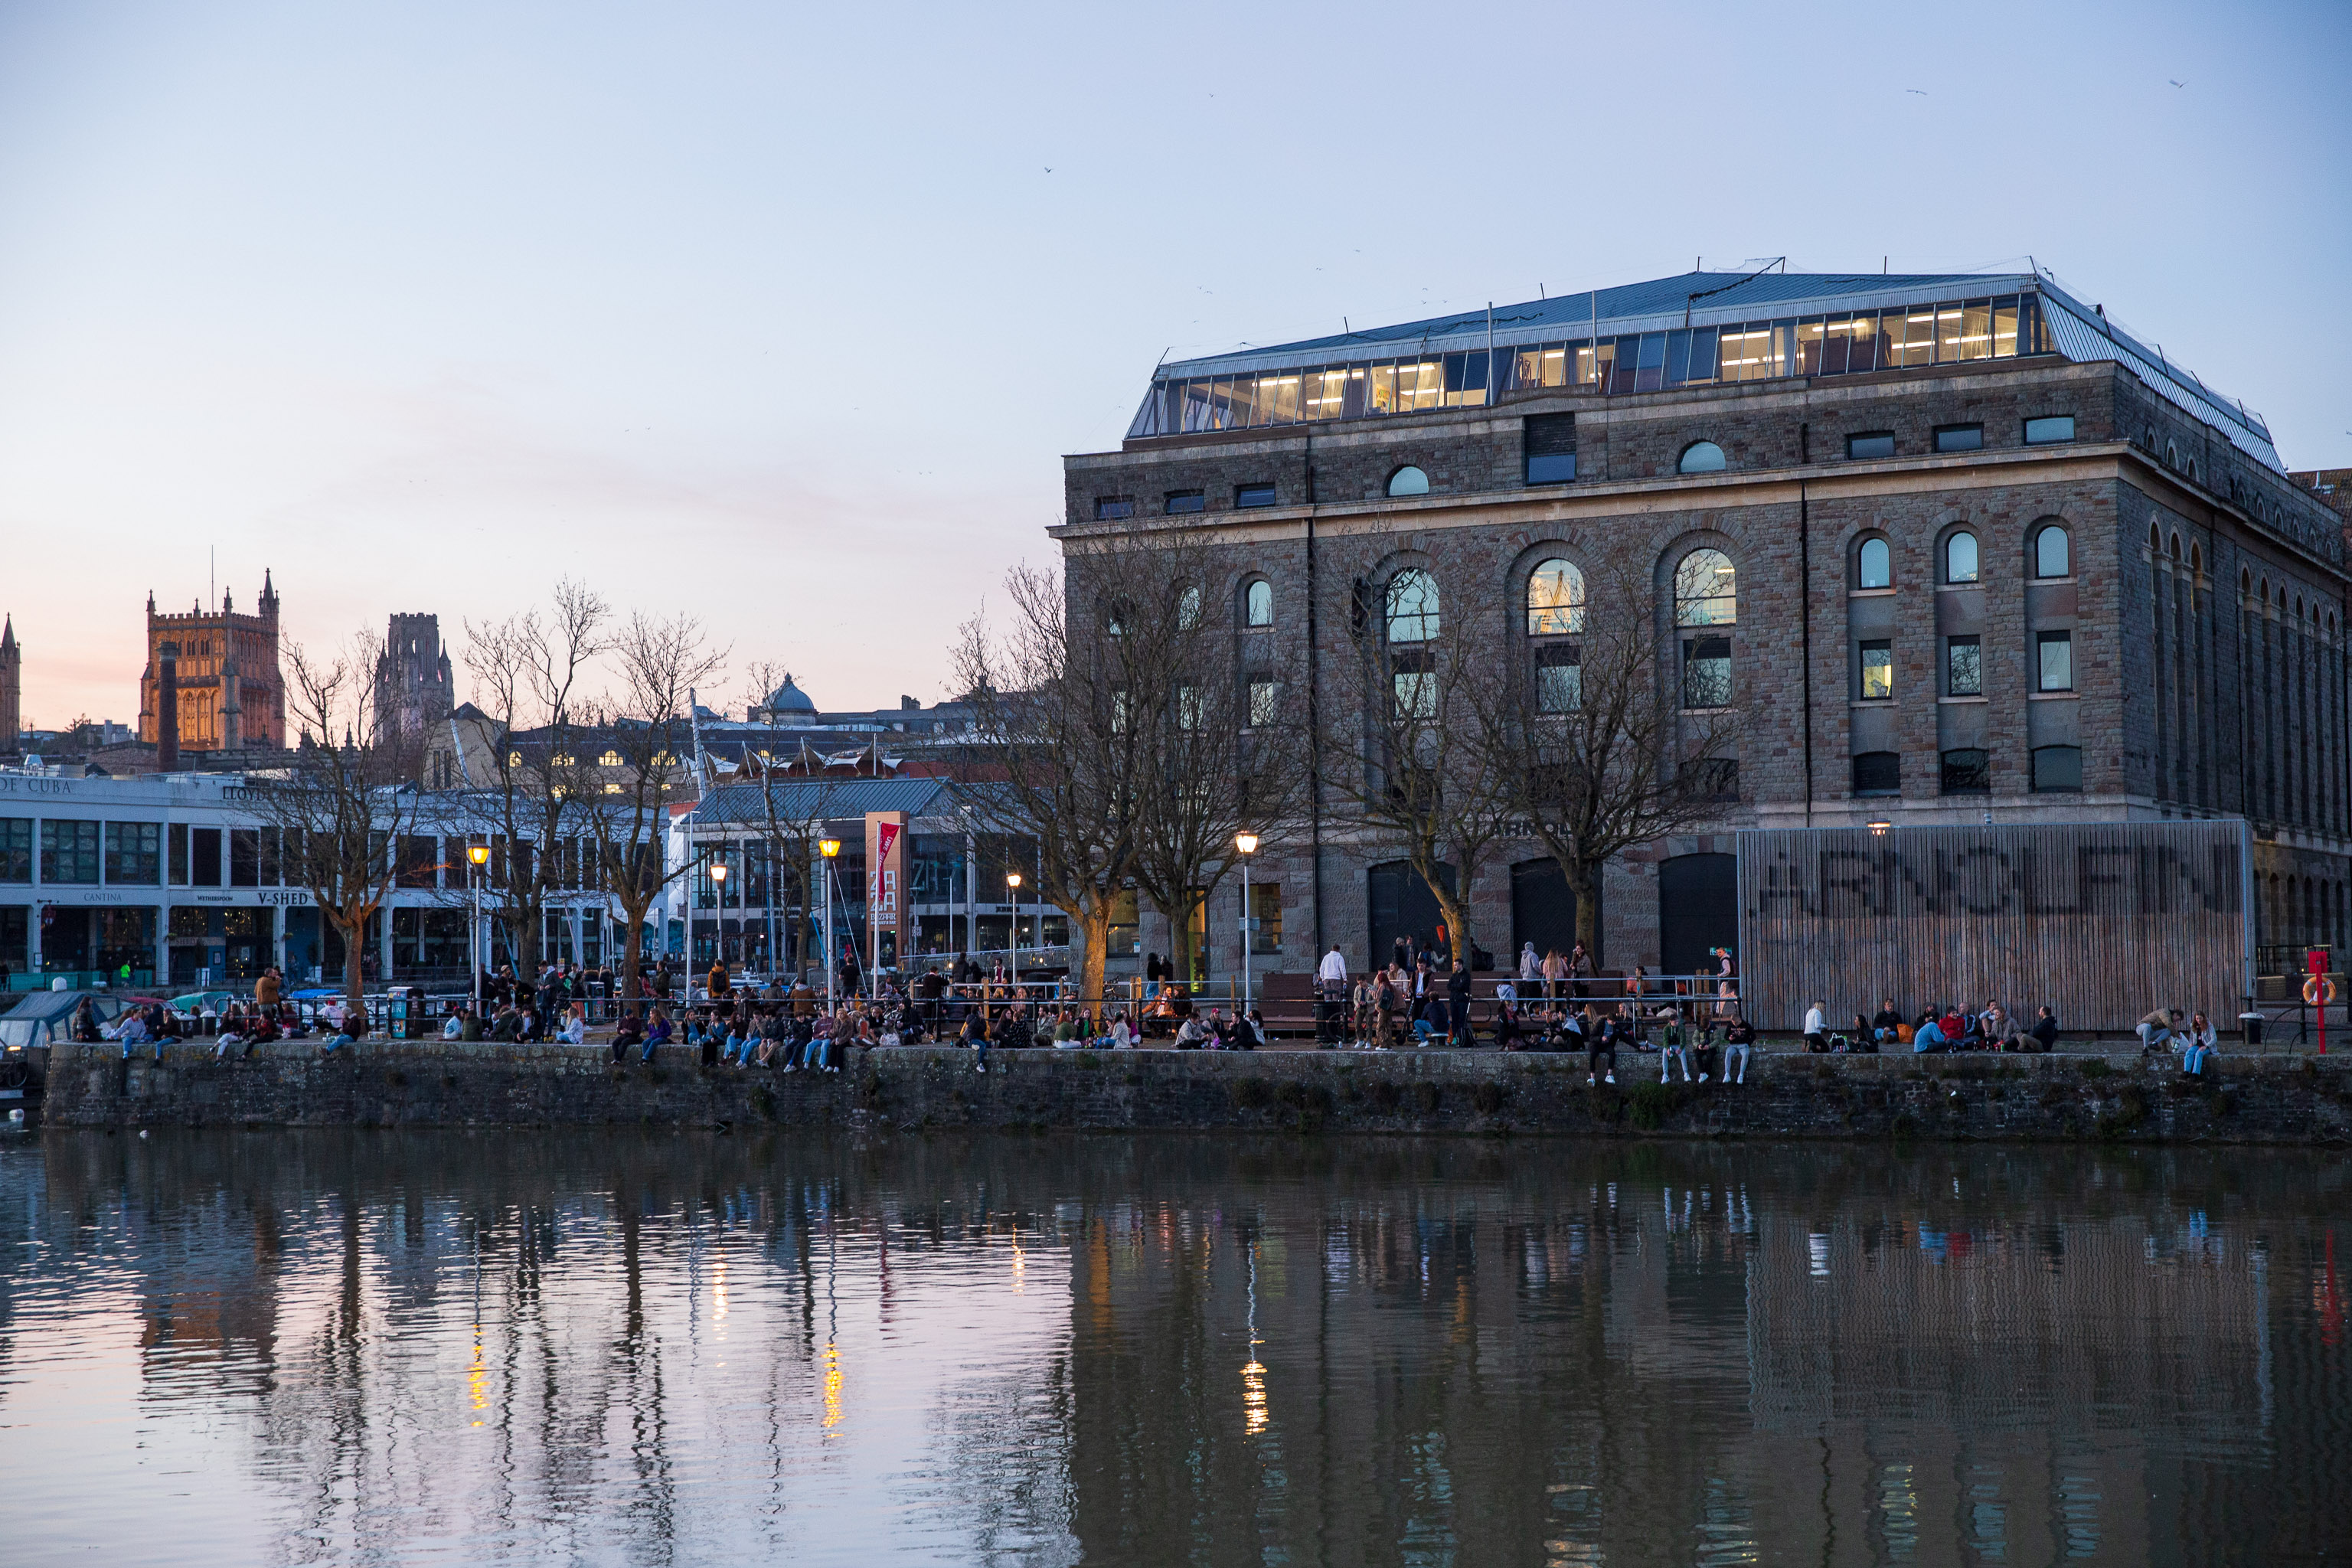 Arnolfini Evening
This is, believe it or not, far less crowded than it would normally be on one of the first evenings of Spring that's vaguely warm enough to hang ar...